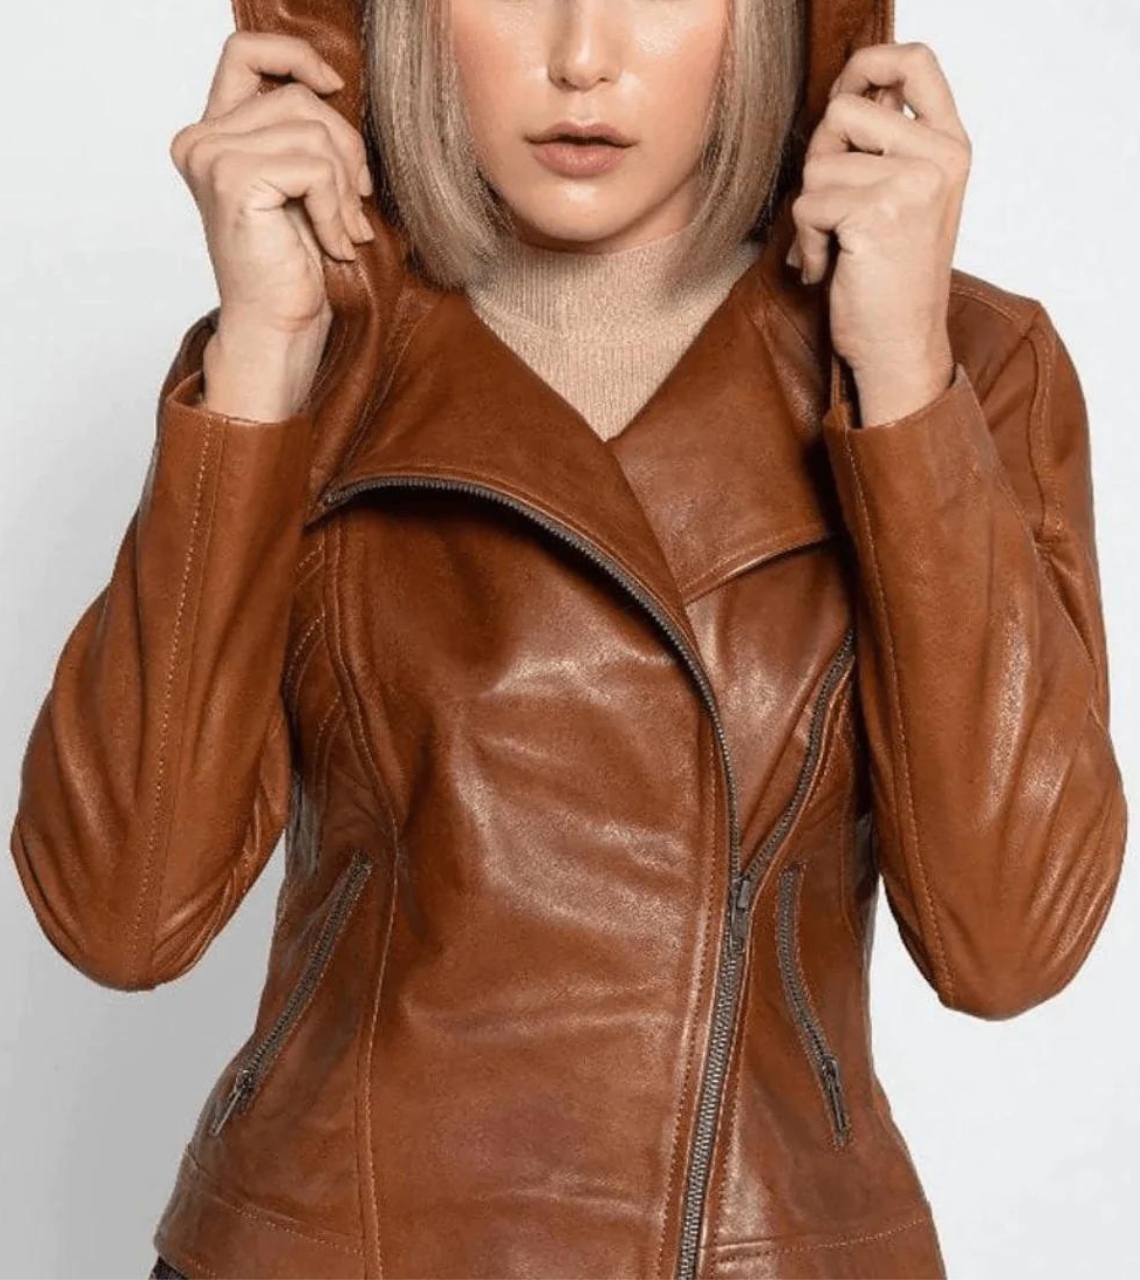 Tan Brown Hooded Women’s Leather Jacket